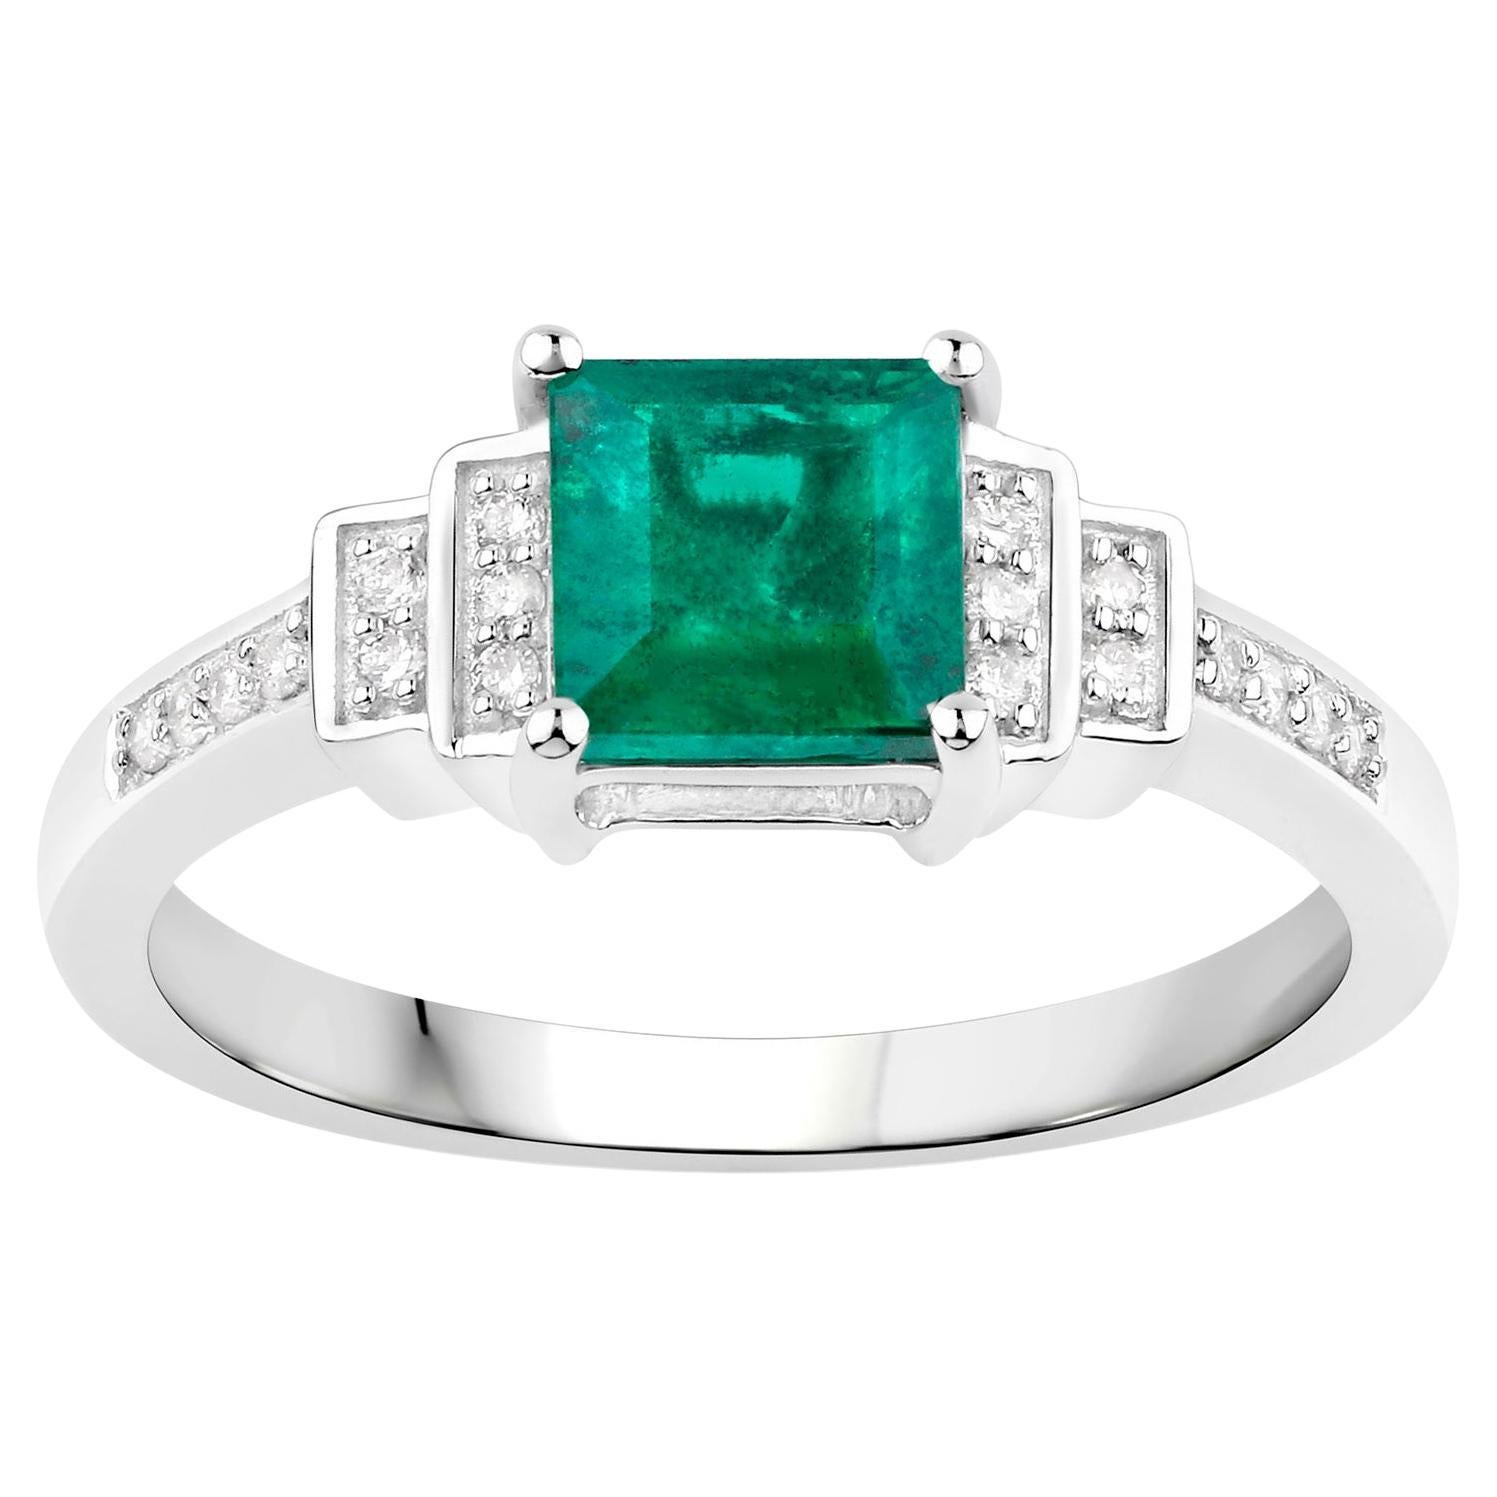 Zambian Emerald Ring With Diamonds 1.09 Carats 14K White Gold For Sale